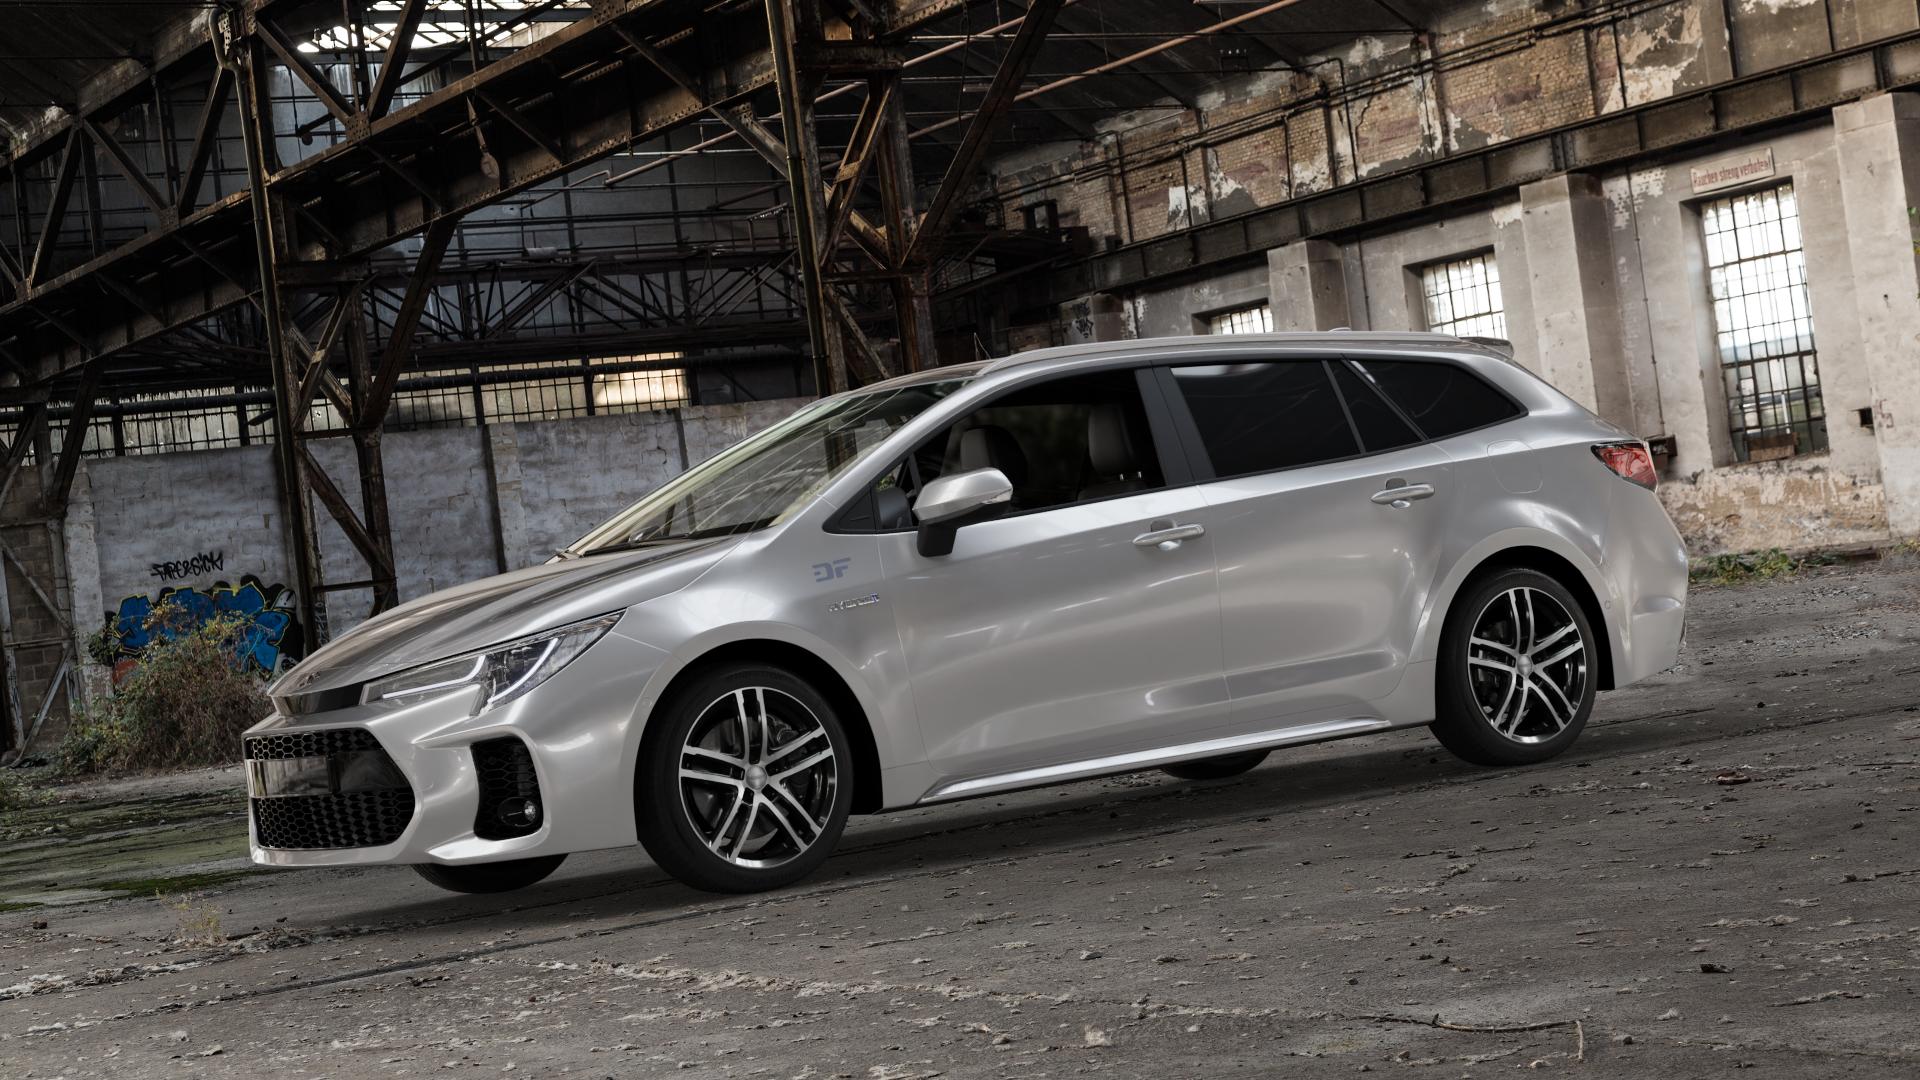 2021 Suzuki Swace Is Another Toyota Corolla Touring Sports For Europe